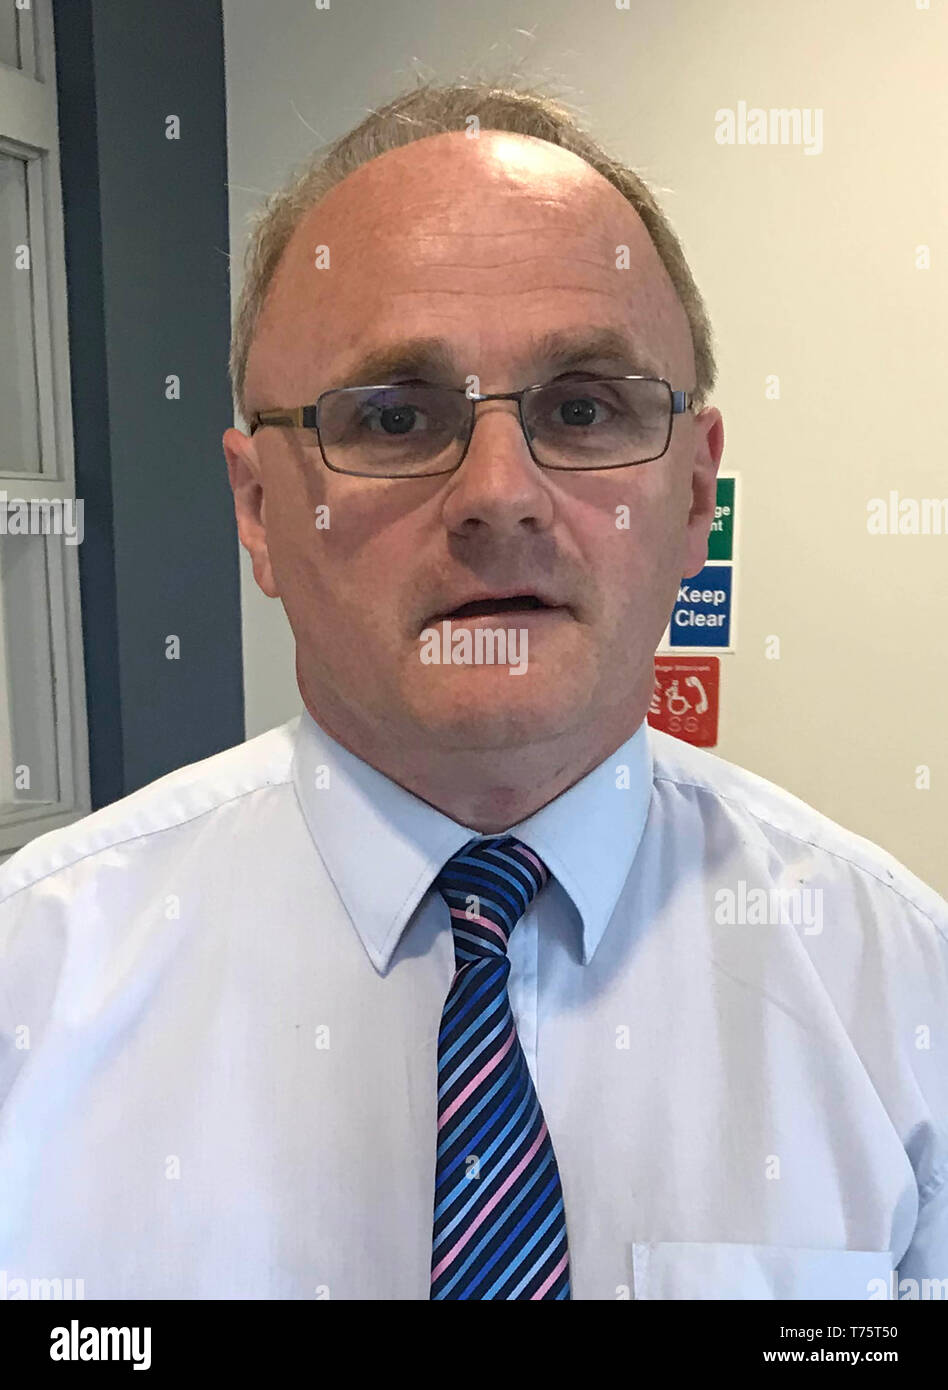 Former Sinn Fein MP Barry McElduff during the local elections count at Omagh Leisure Centre, who has secured a seat on the Fermanagh and Omagh District Council. Stock Photo